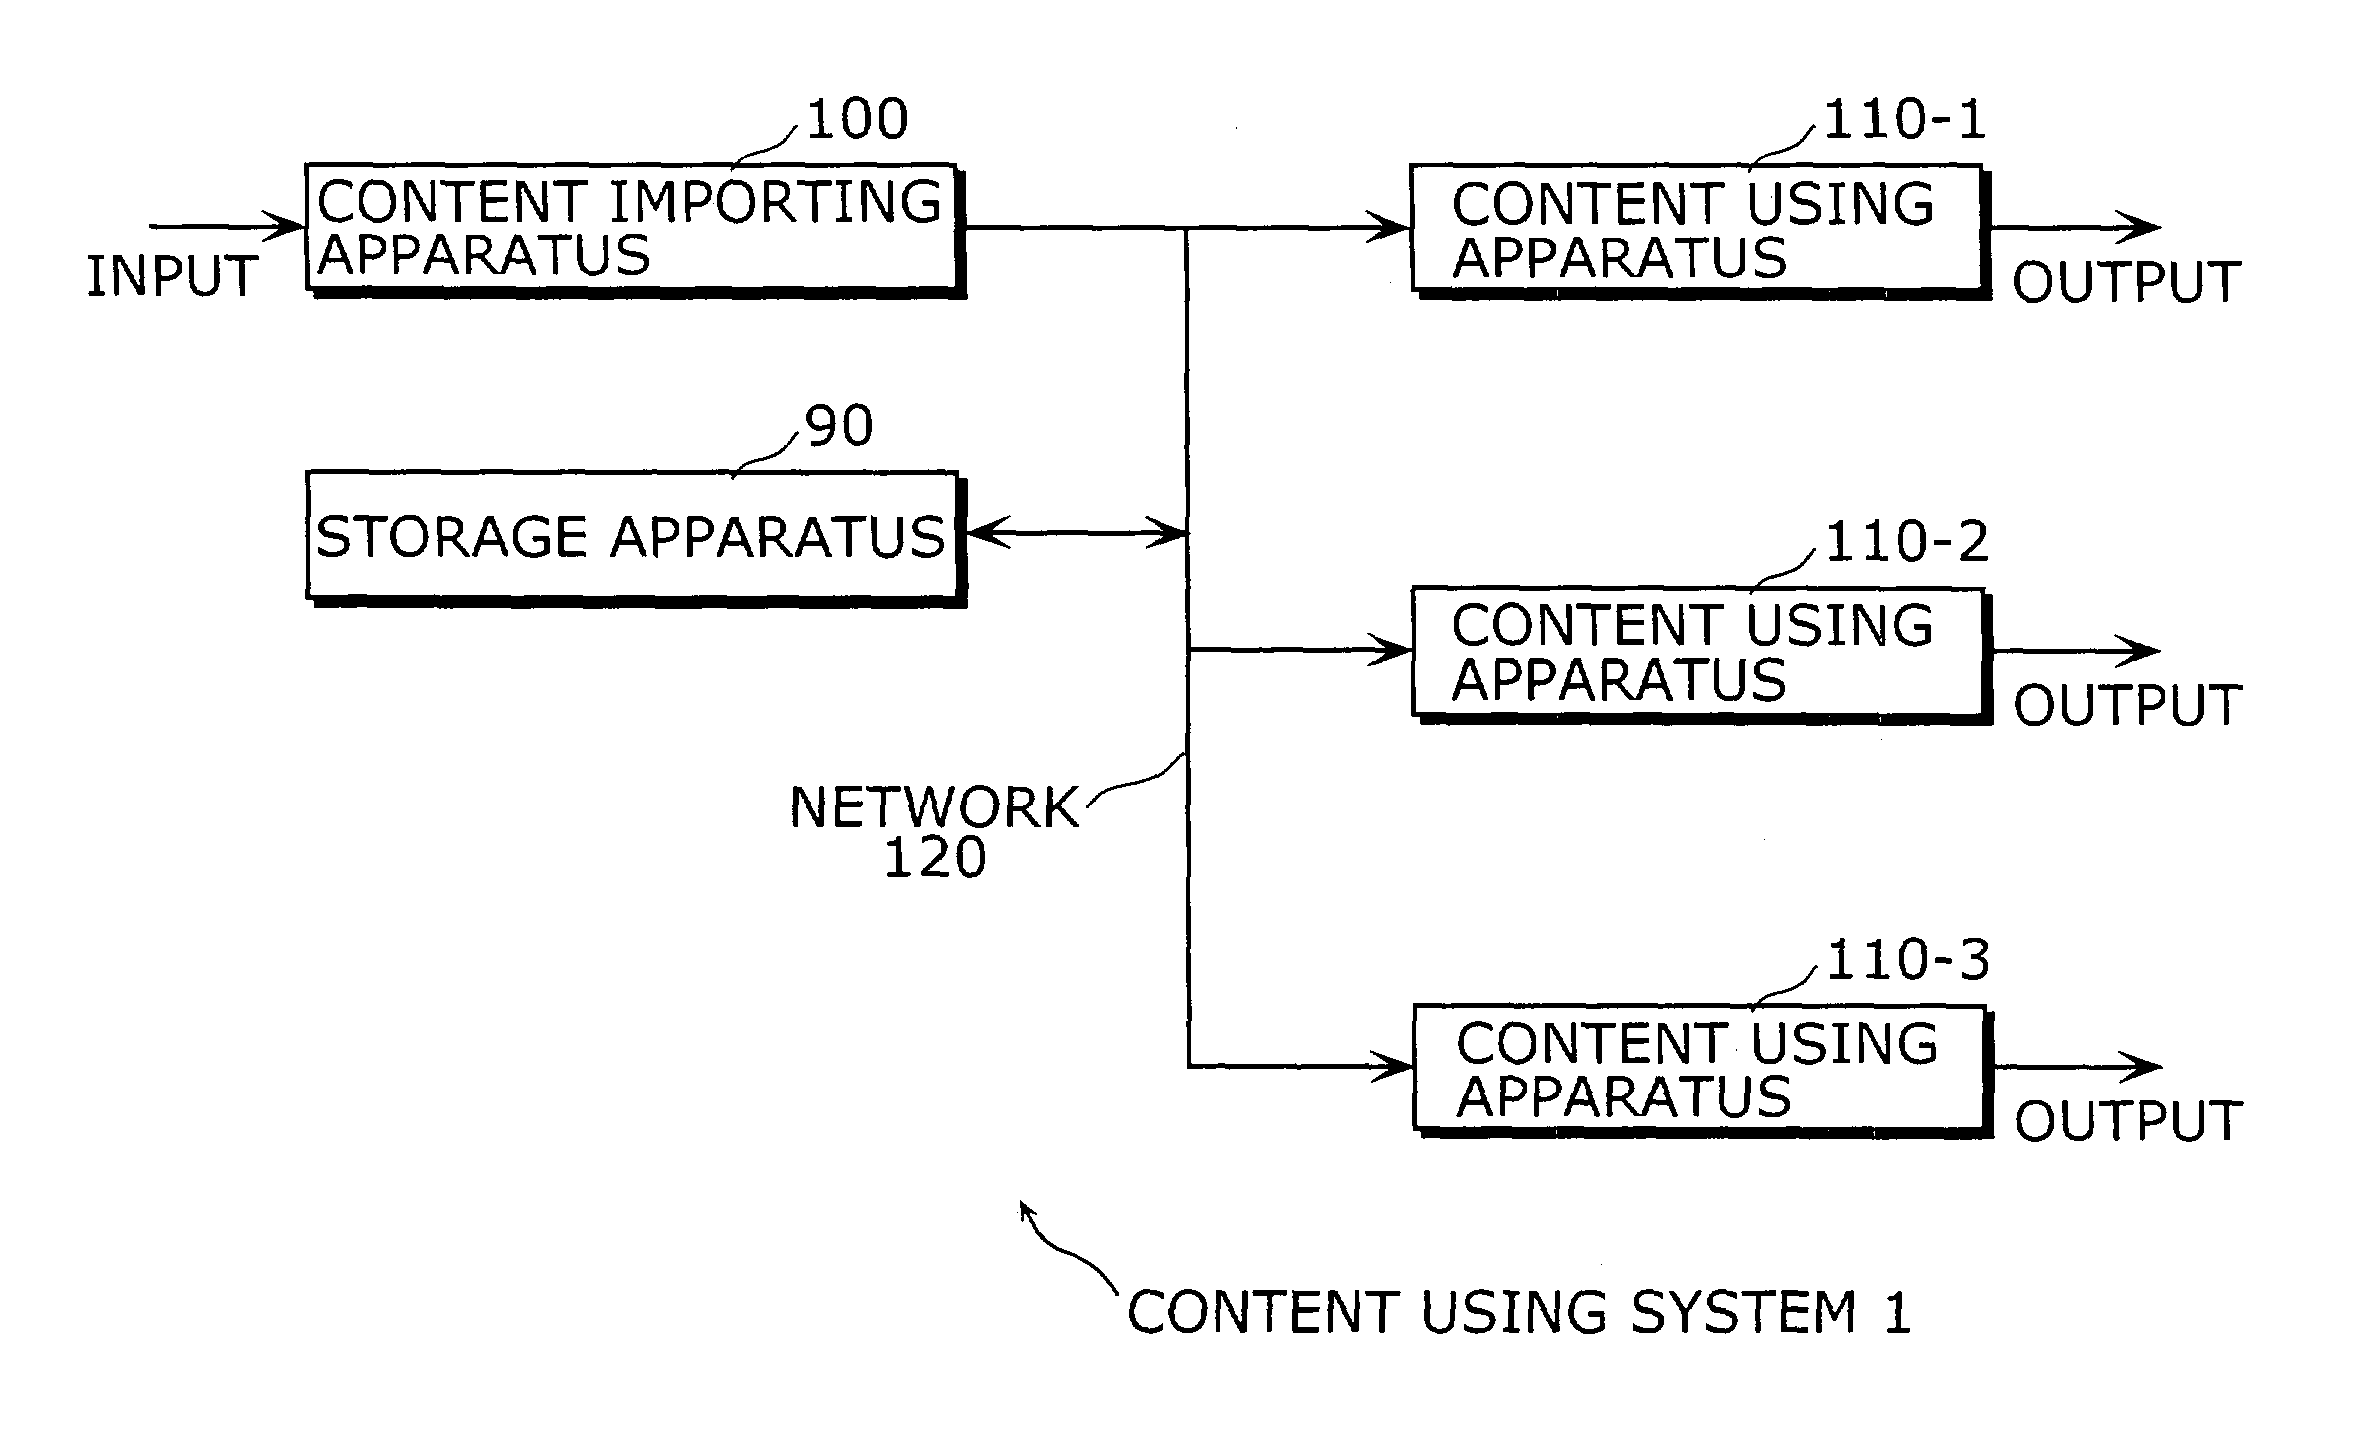 Content using system